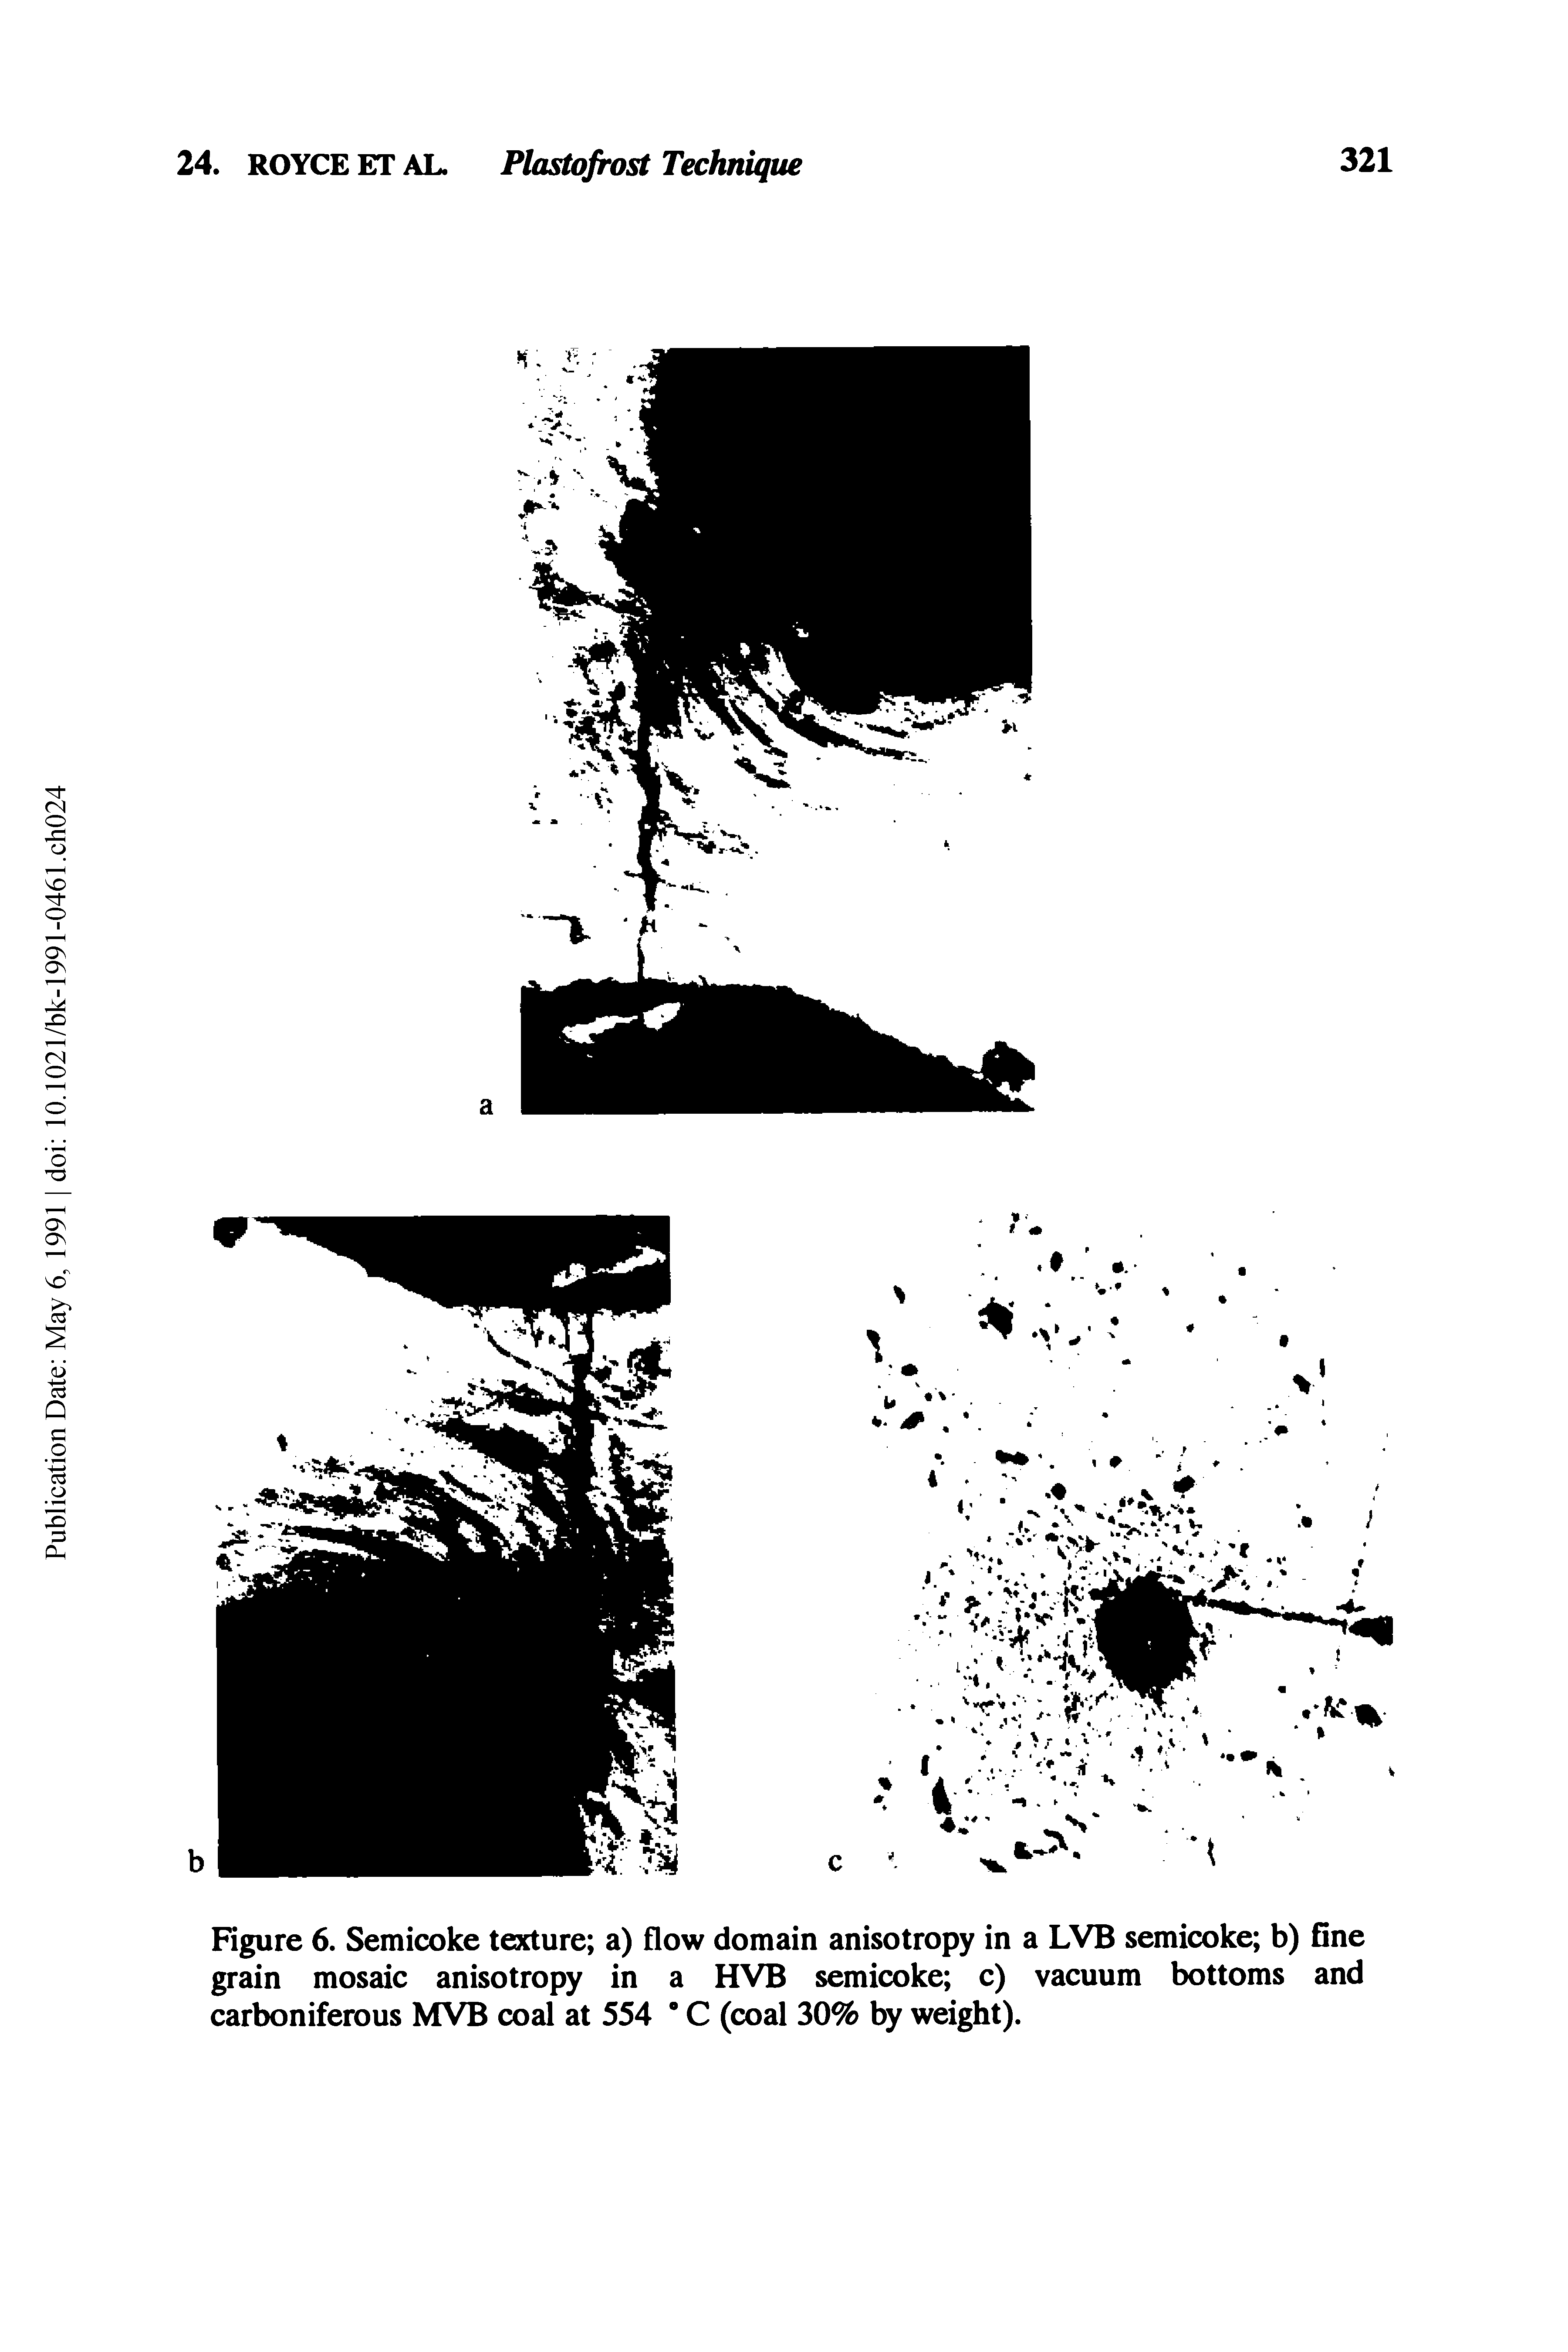 Figure 6. Semicoke texture a) flow domain anisotropy in a LVB semicoke b) fine grain mosaic anisotropy in a HVB semicoke c) vacuum bottoms and carboniferous MVB coal at 554 " C (coal 30% by weight).